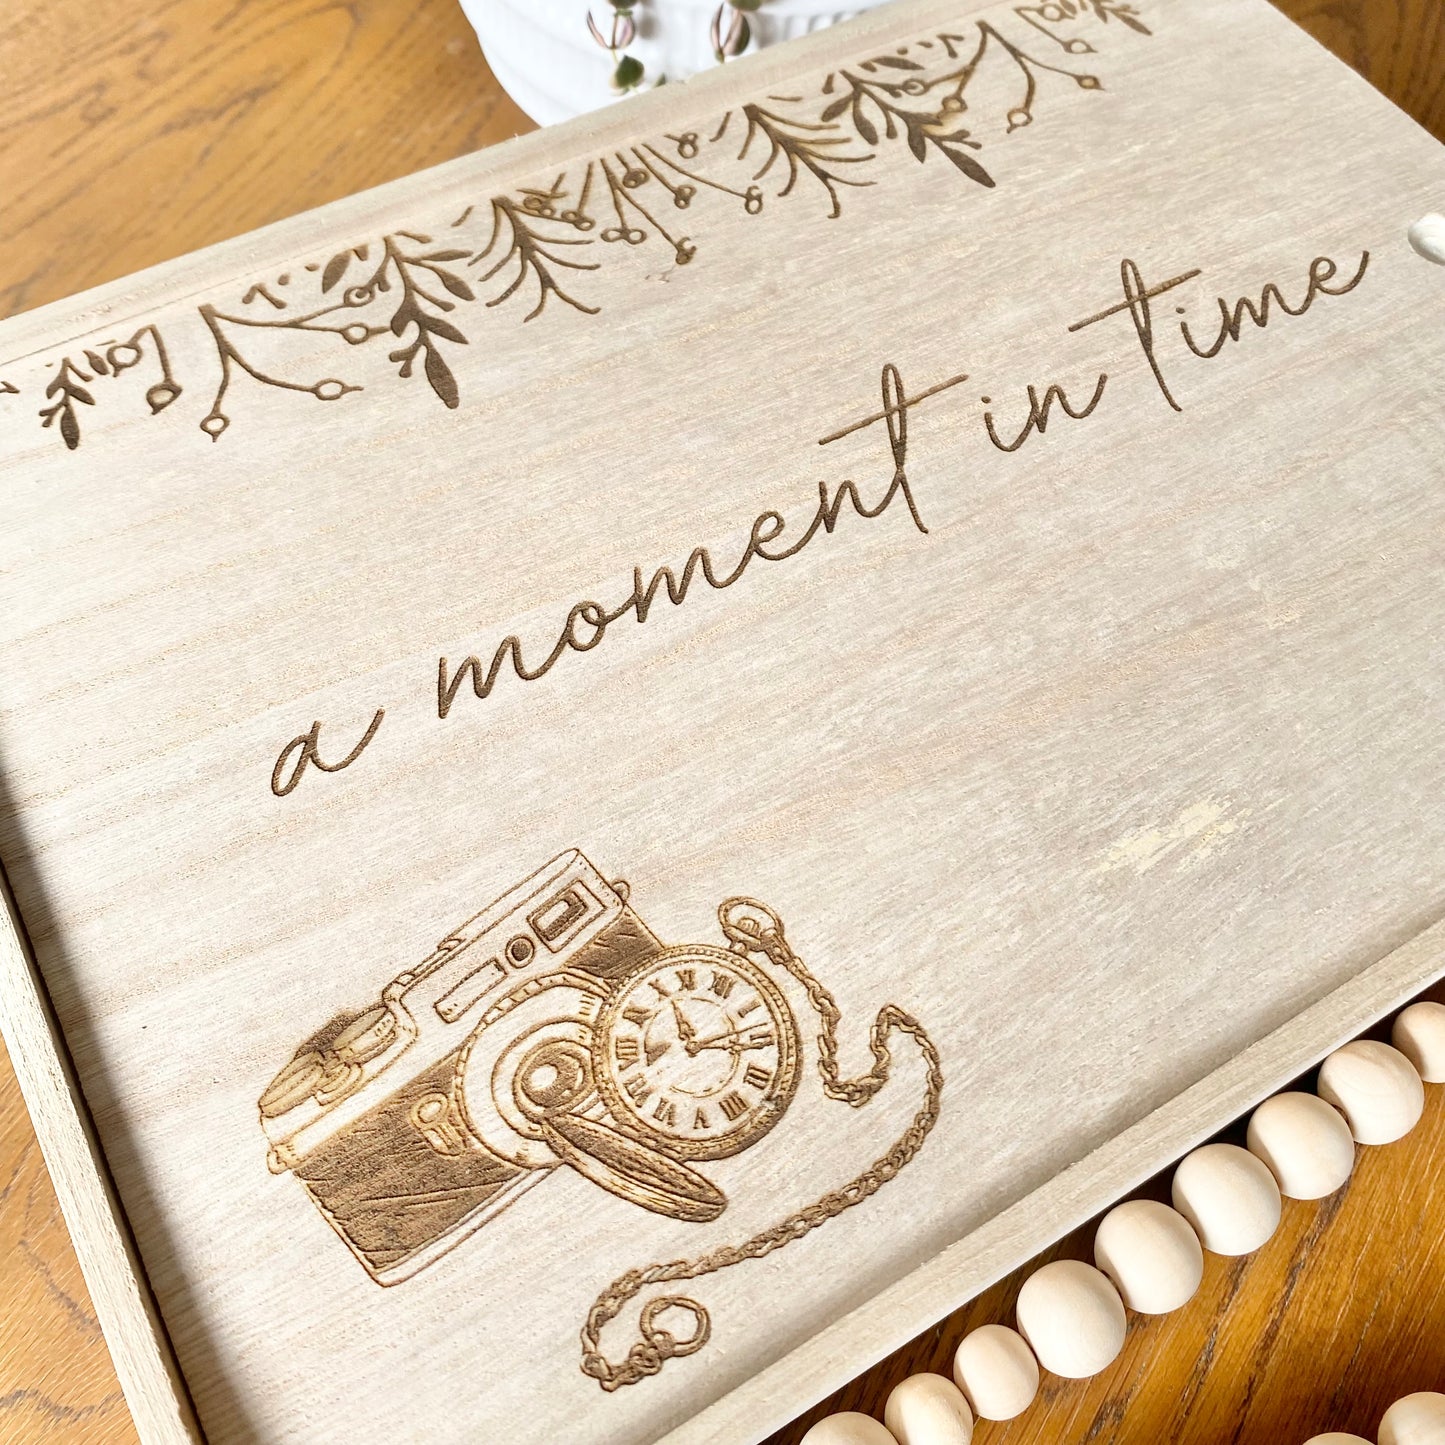 A moment in time photos keepsake box